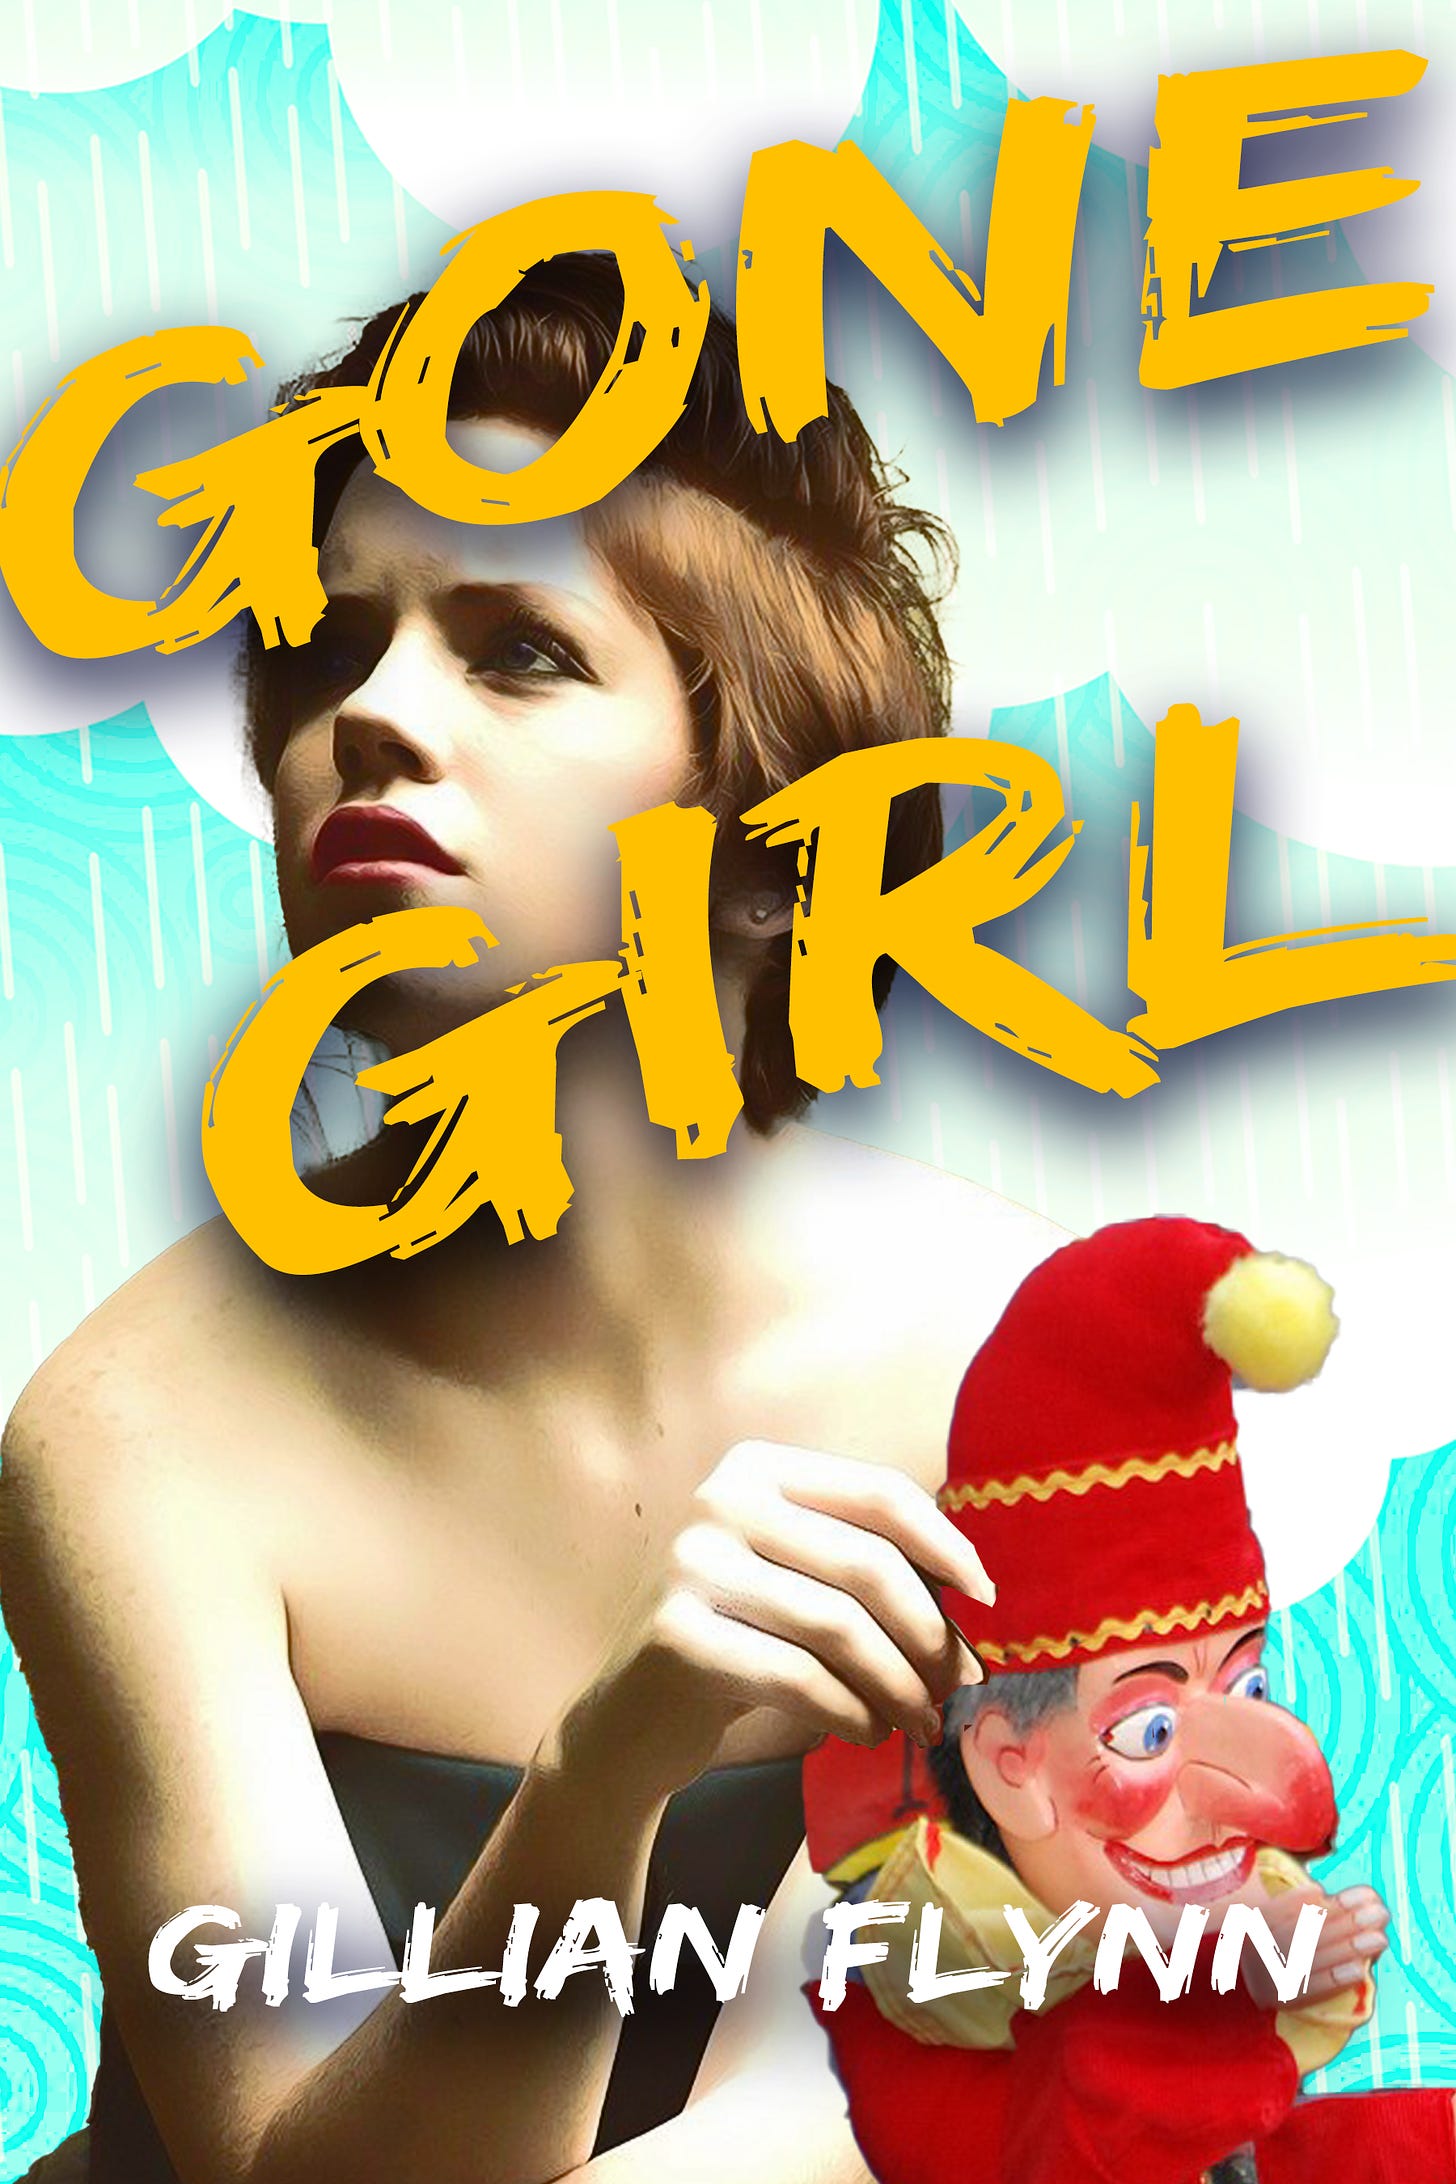 gone girl by gillian flynn. A teenage girl holds a punch puppet. There are cartoon clouds raining in the background. Wtf?